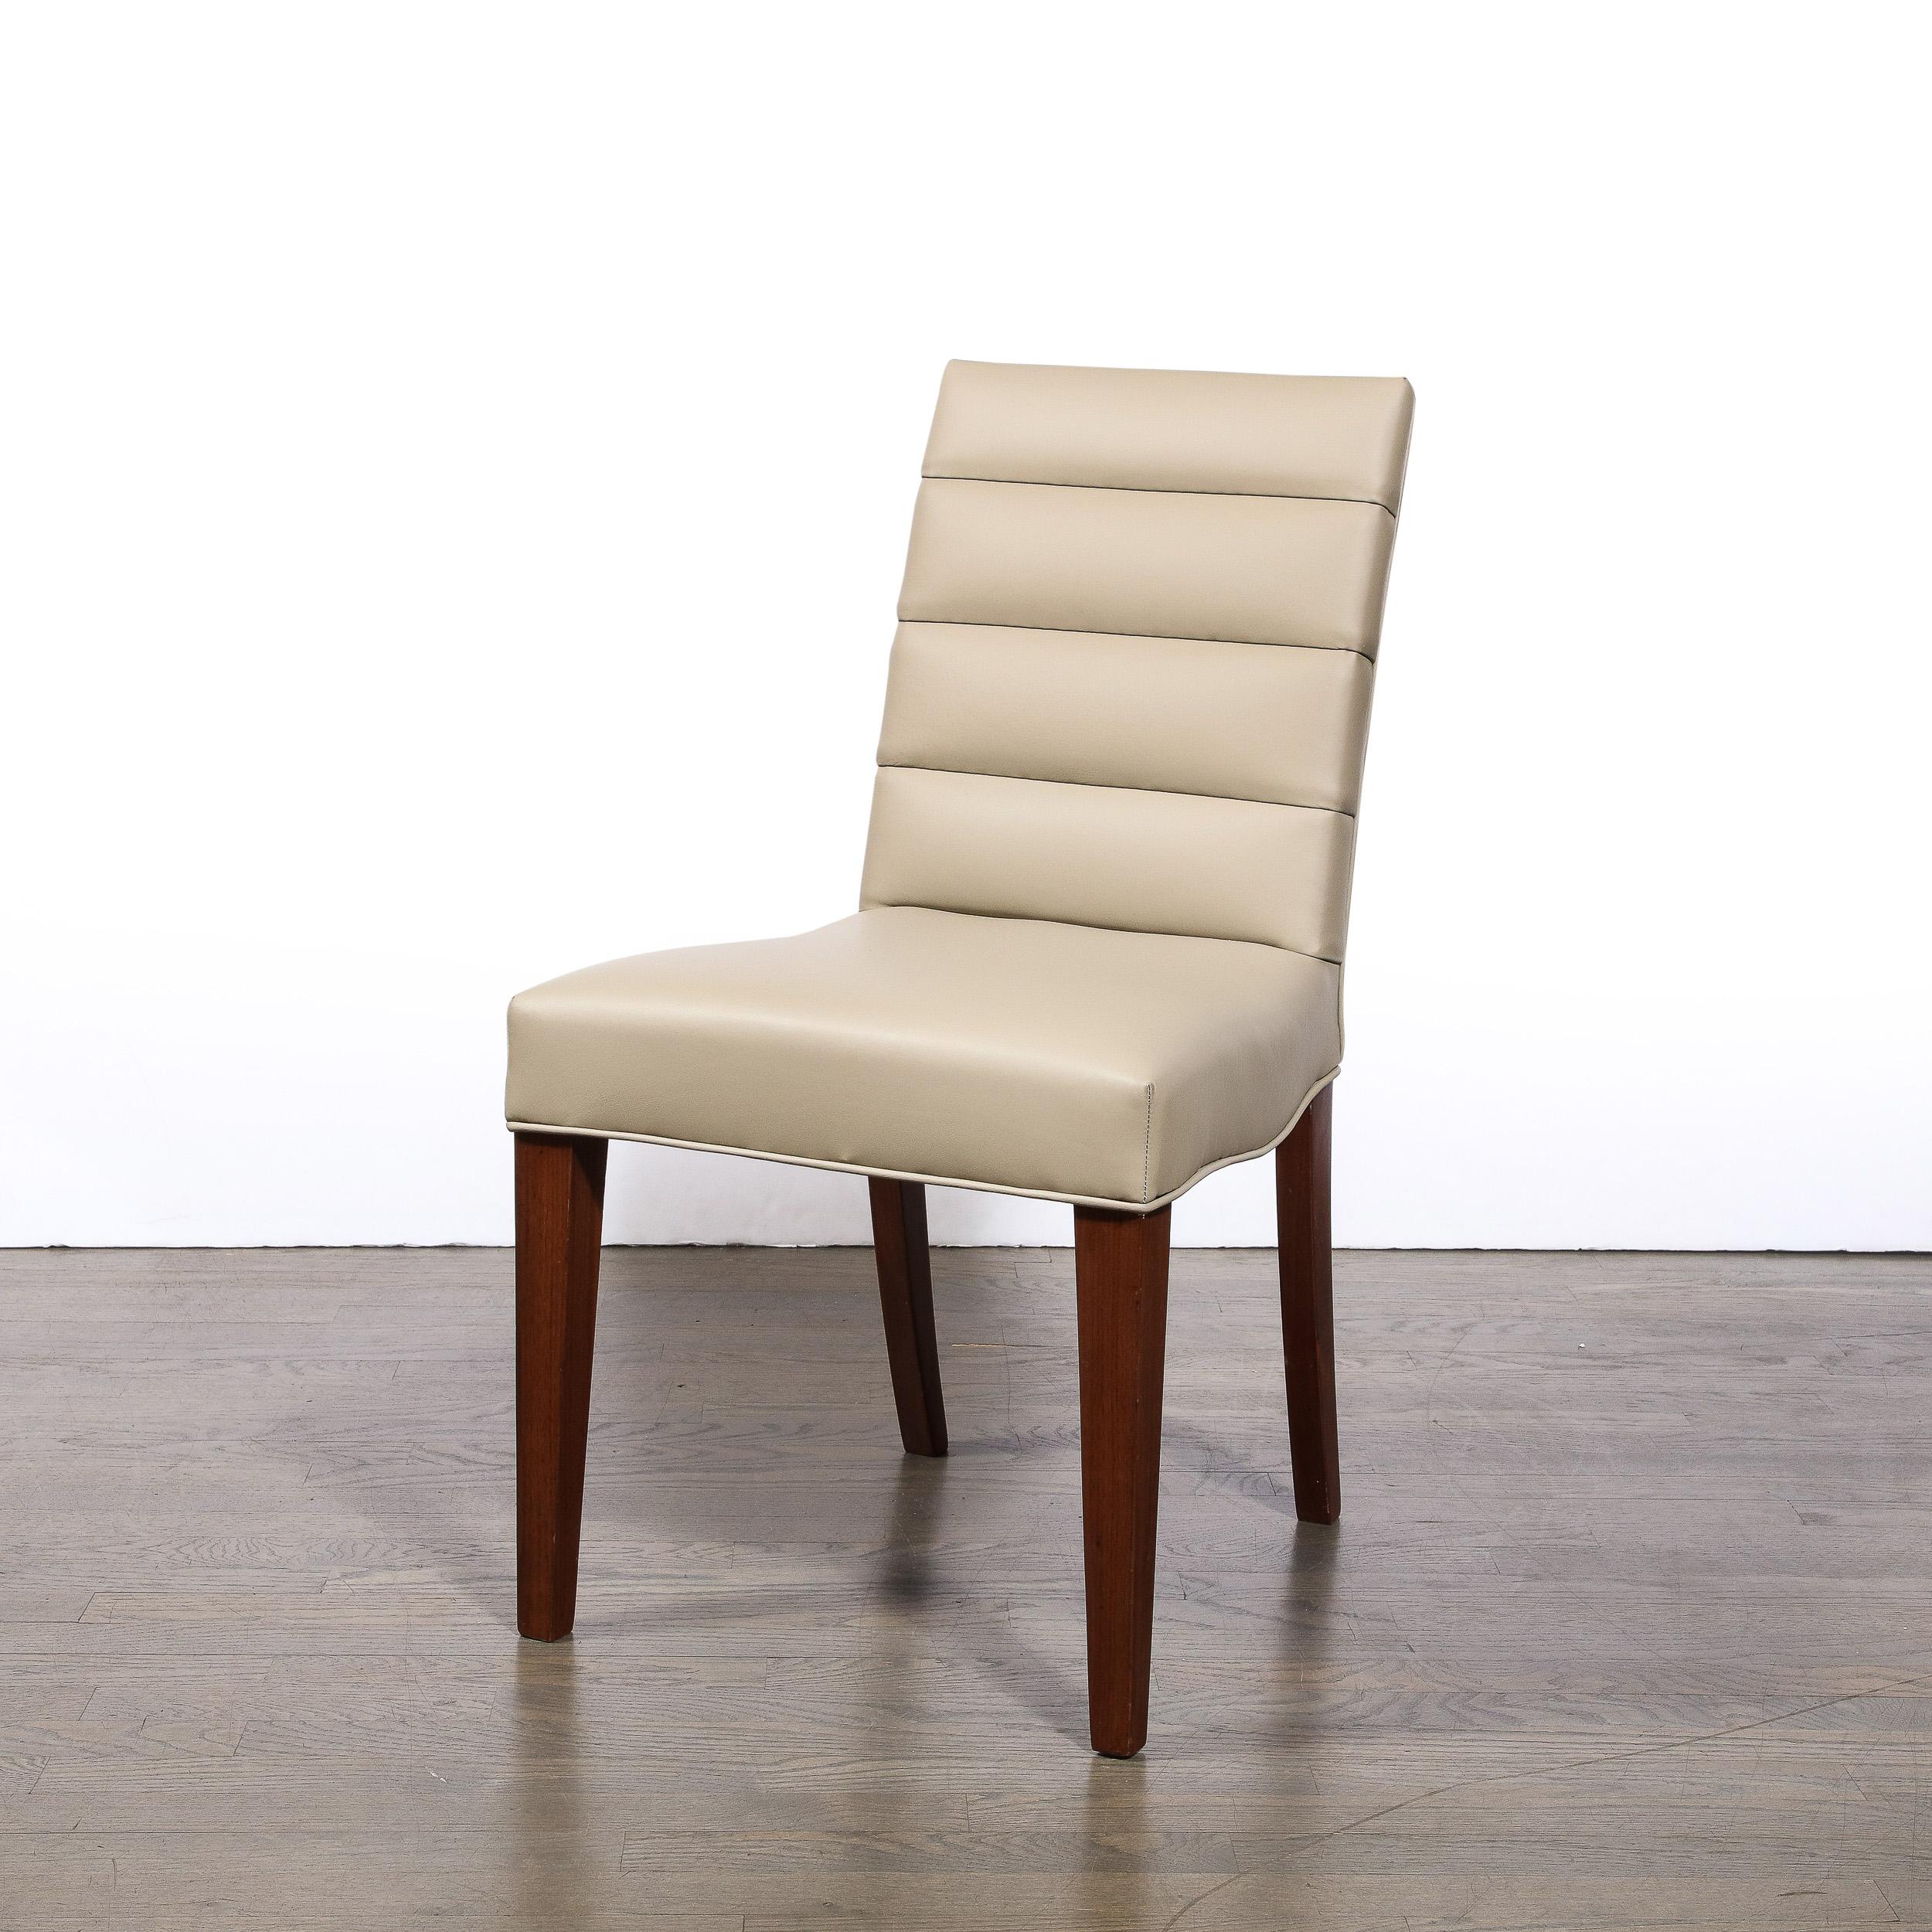 American Art Deco Gilbert Rohde Chair in Holly Hunt Leather w/ Tufted Back & Walnut Legs For Sale